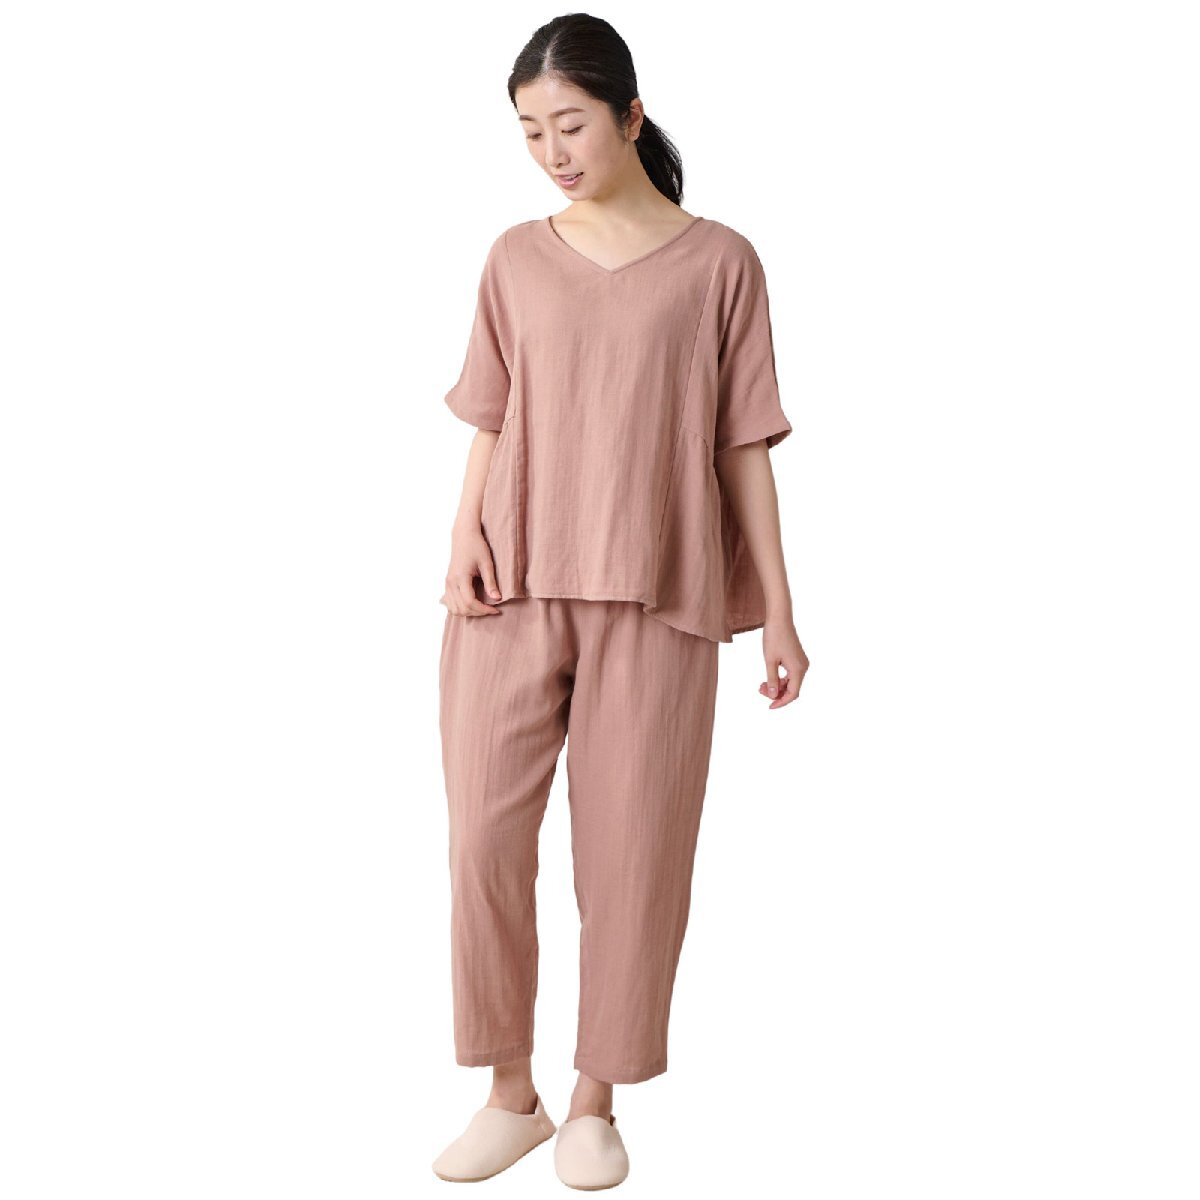 ma.. moisturizer cream as with ....... wrap up room wear short sleeves summer pyjamas V neck ... type pink L size cotton 100%